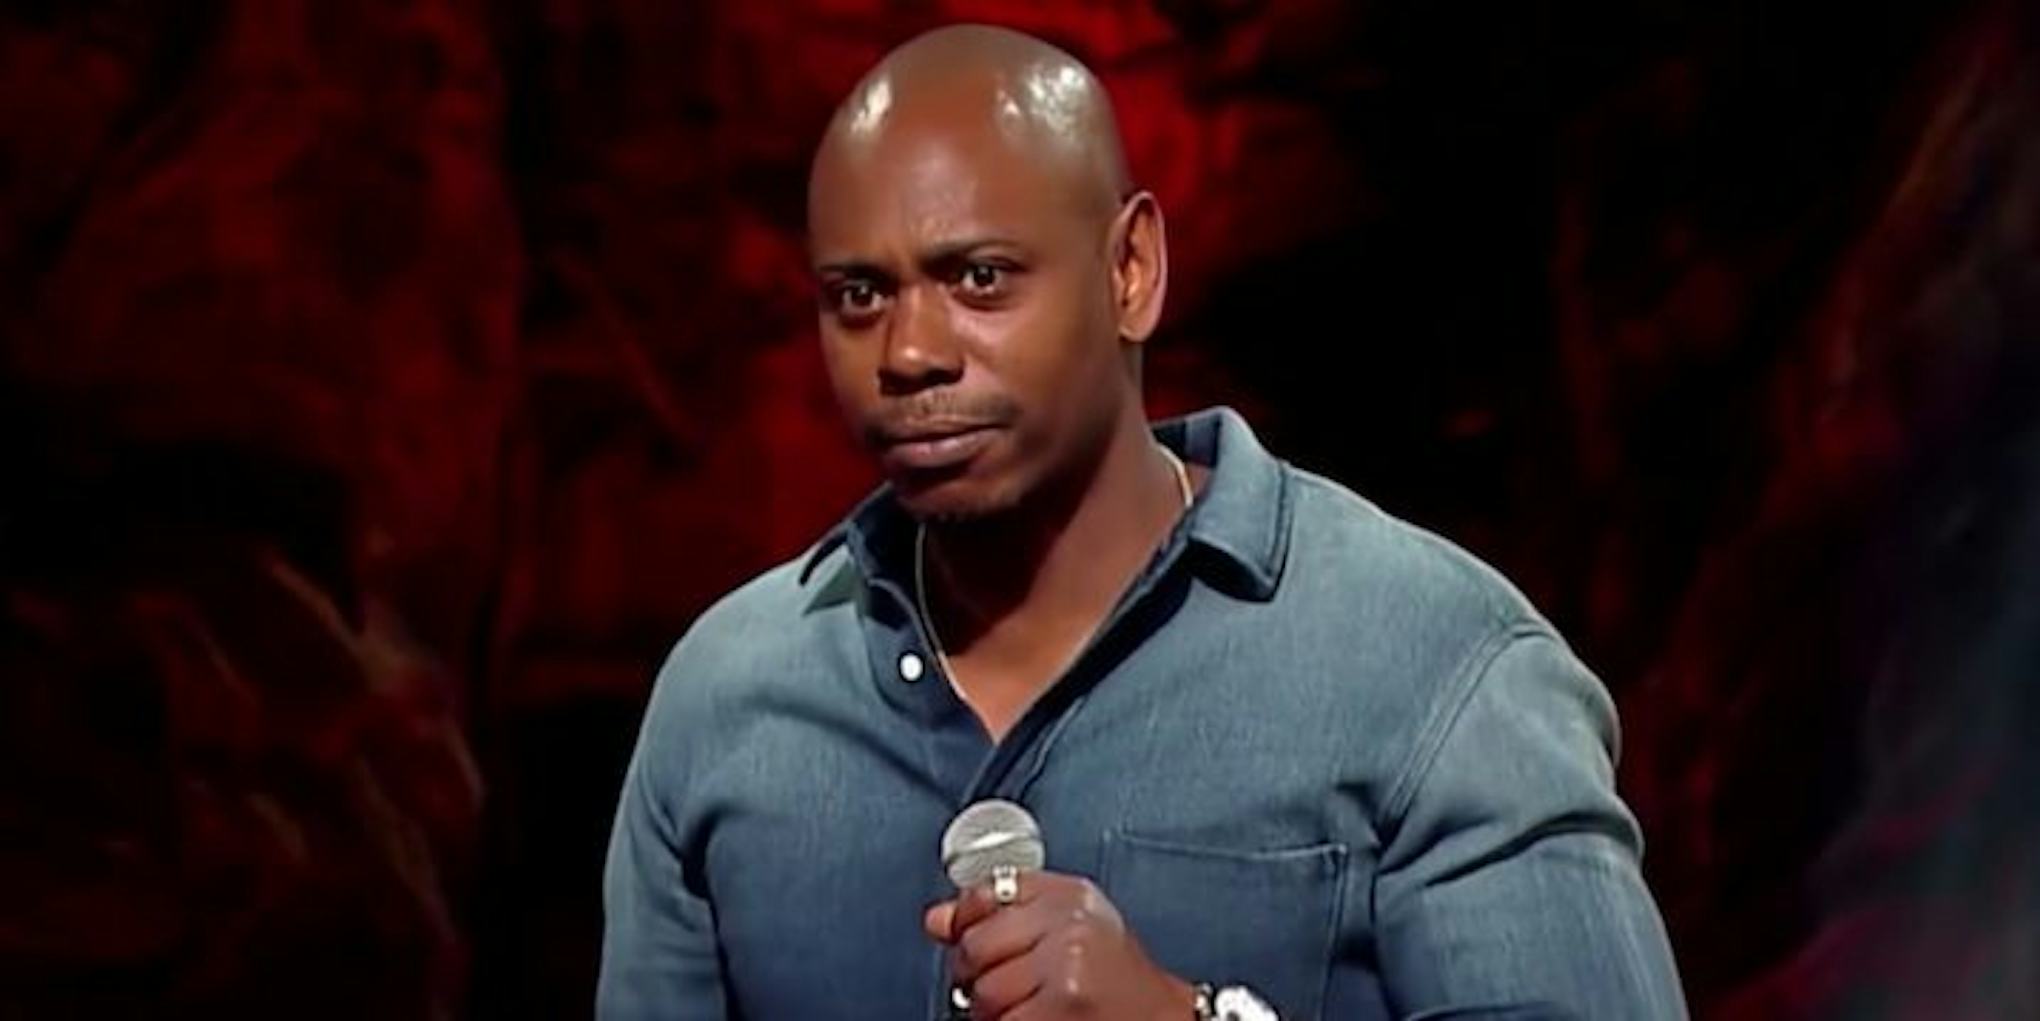 Dave Chappelle Drops Second Trailer For His Netflix Special